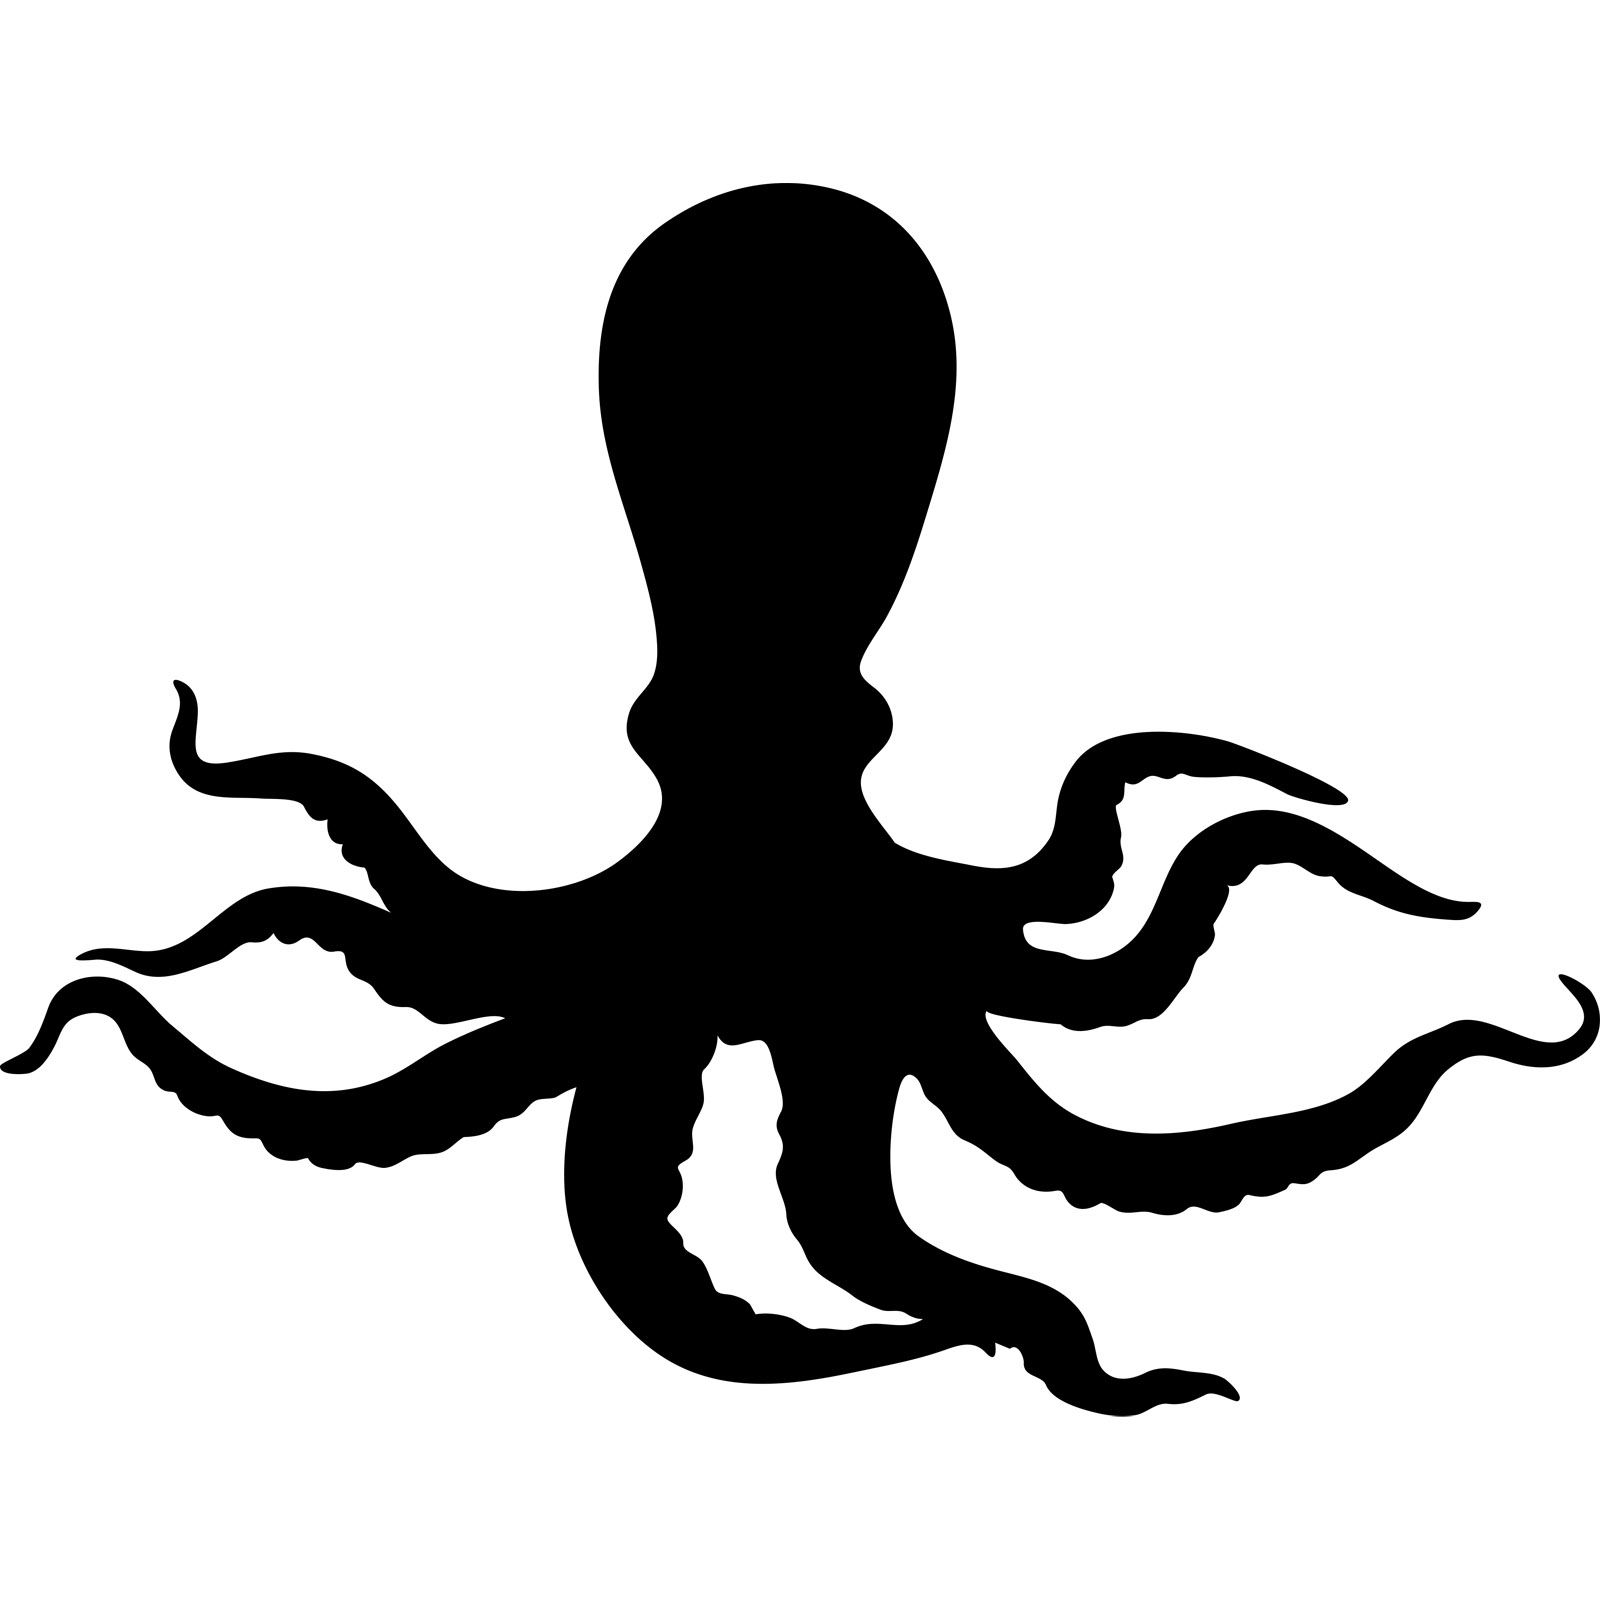 Free Octopus Silhouette Vector, Download Free Clip Art, Free